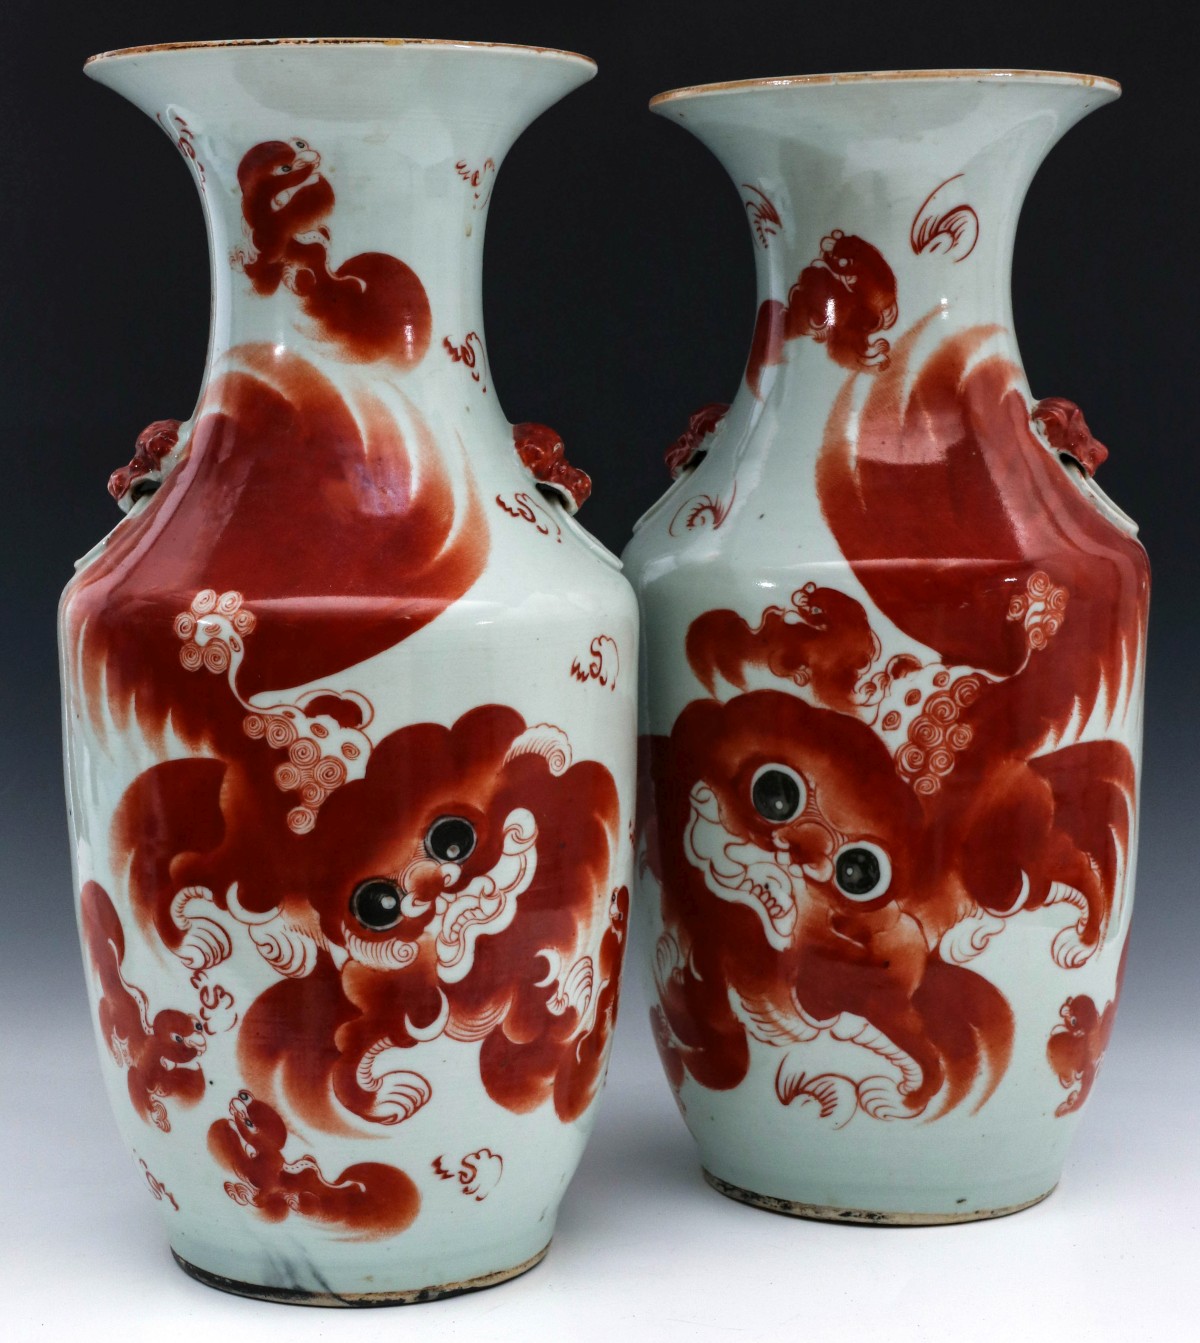 A PAIR OF LARGE 19TH CENTURY CHINESE PORCELAIN VASES